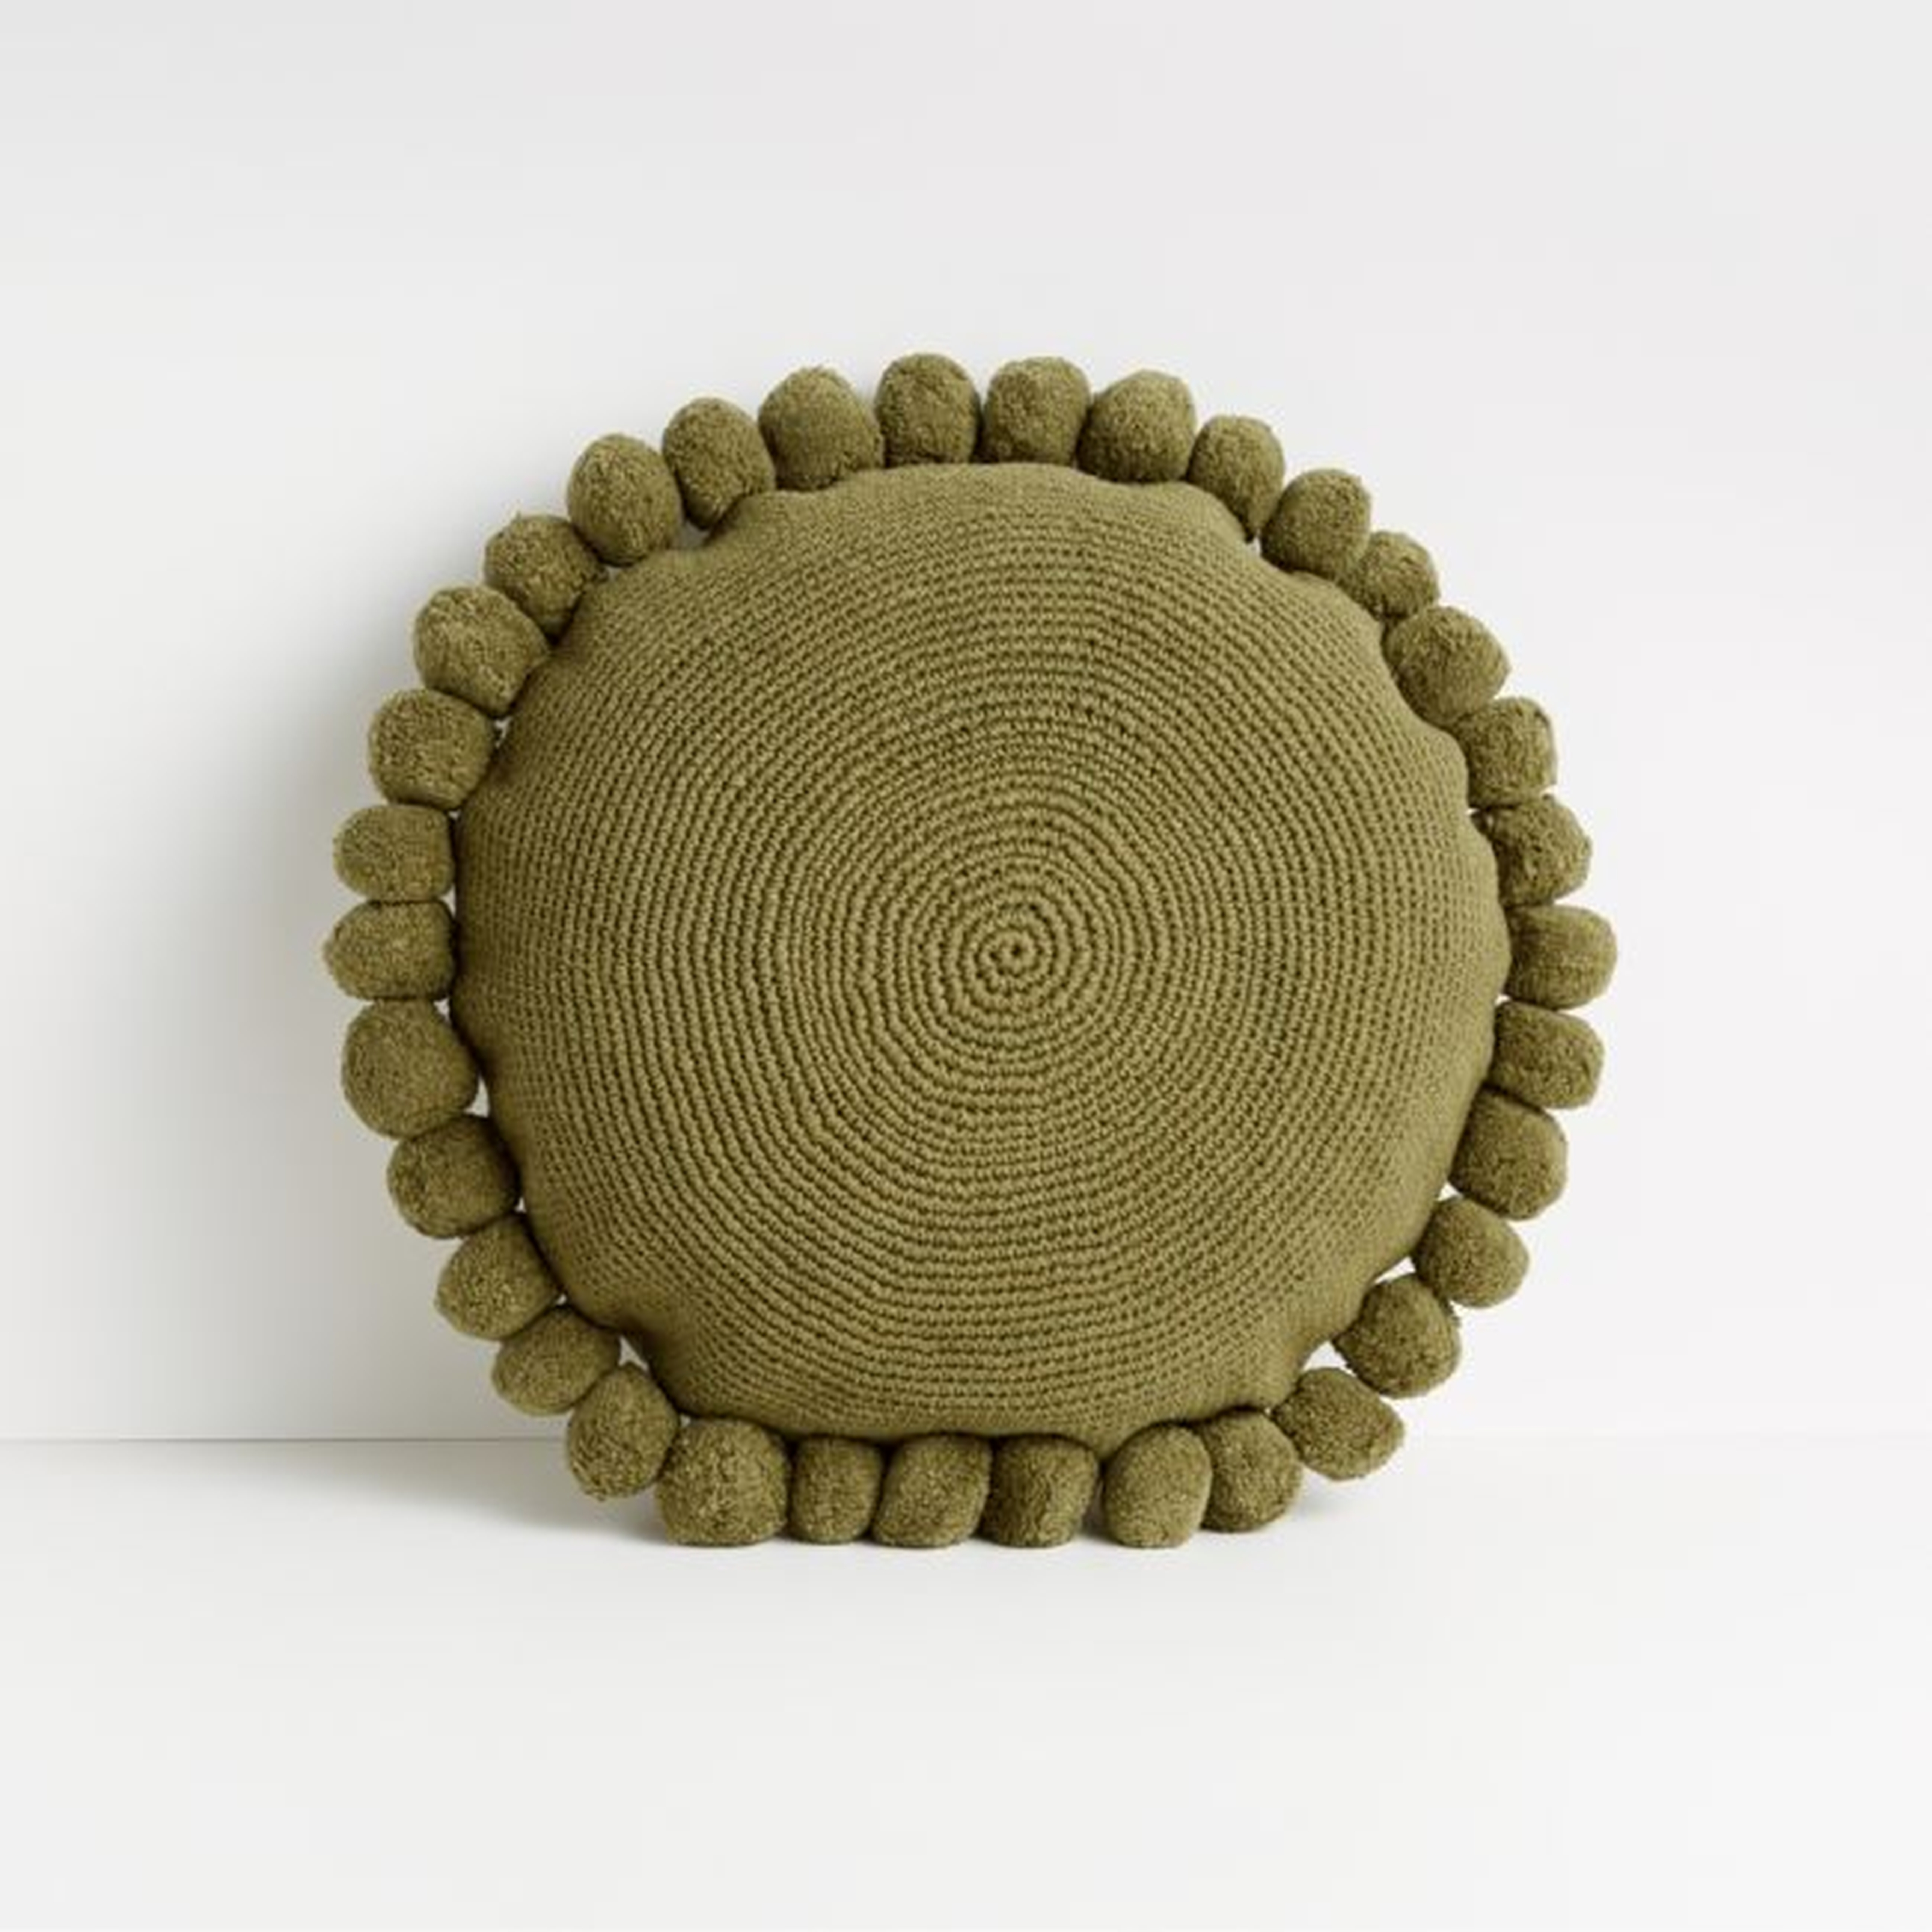 Pico 18" Olive Branch Round Pom Pom Pillow - Crate and Barrel